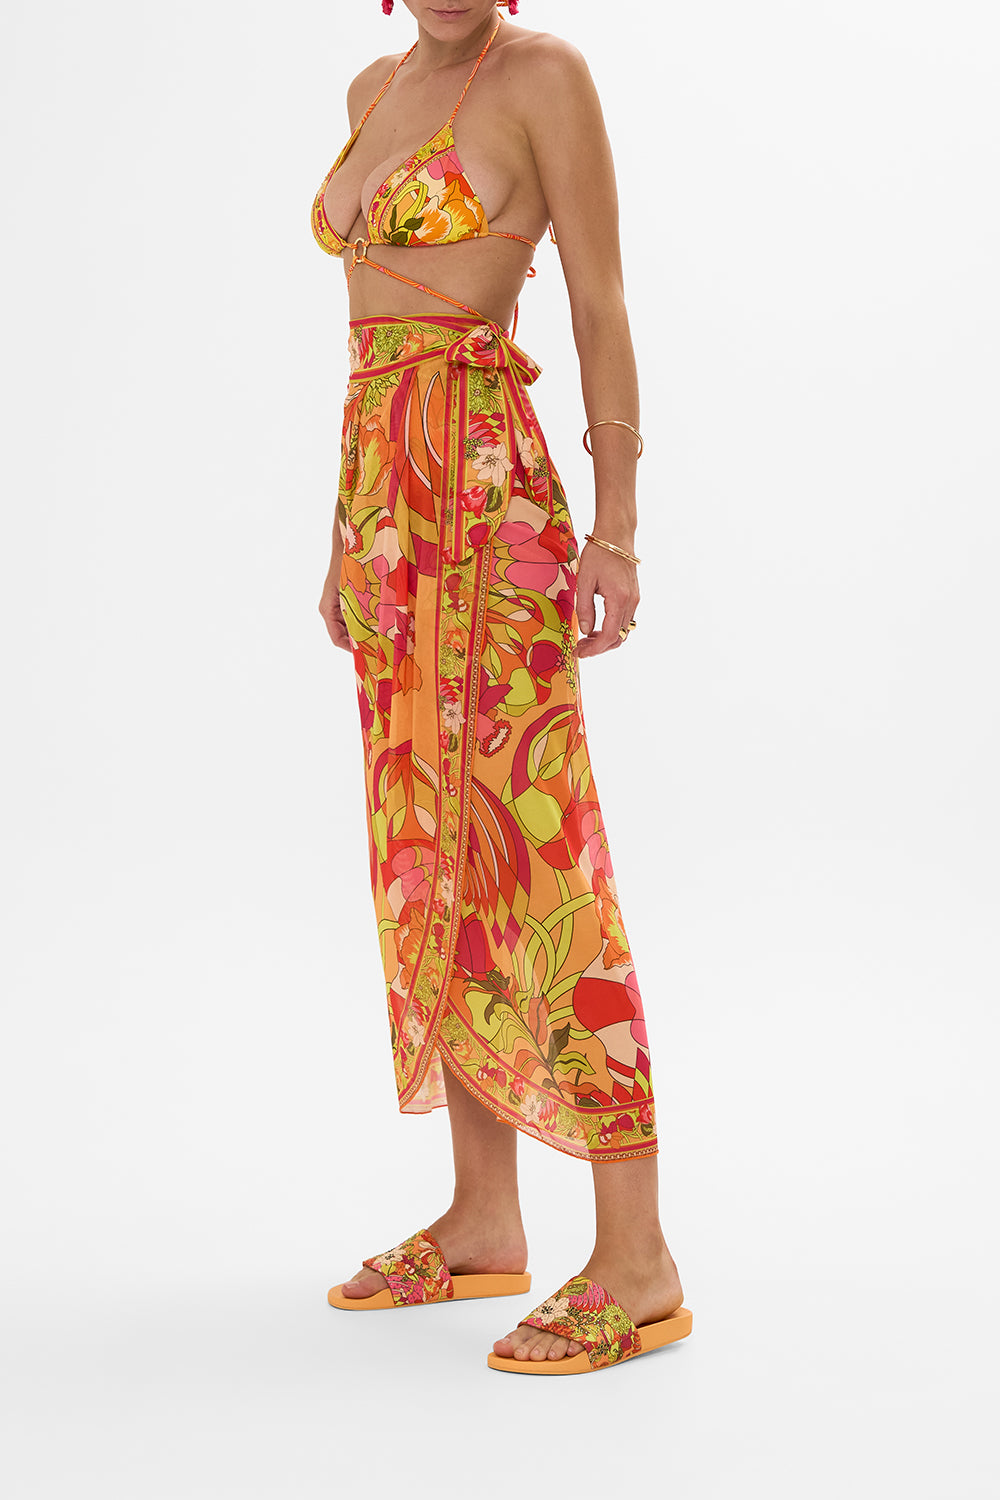 CAMILLA floral long draped sarong in The Flower Child Society